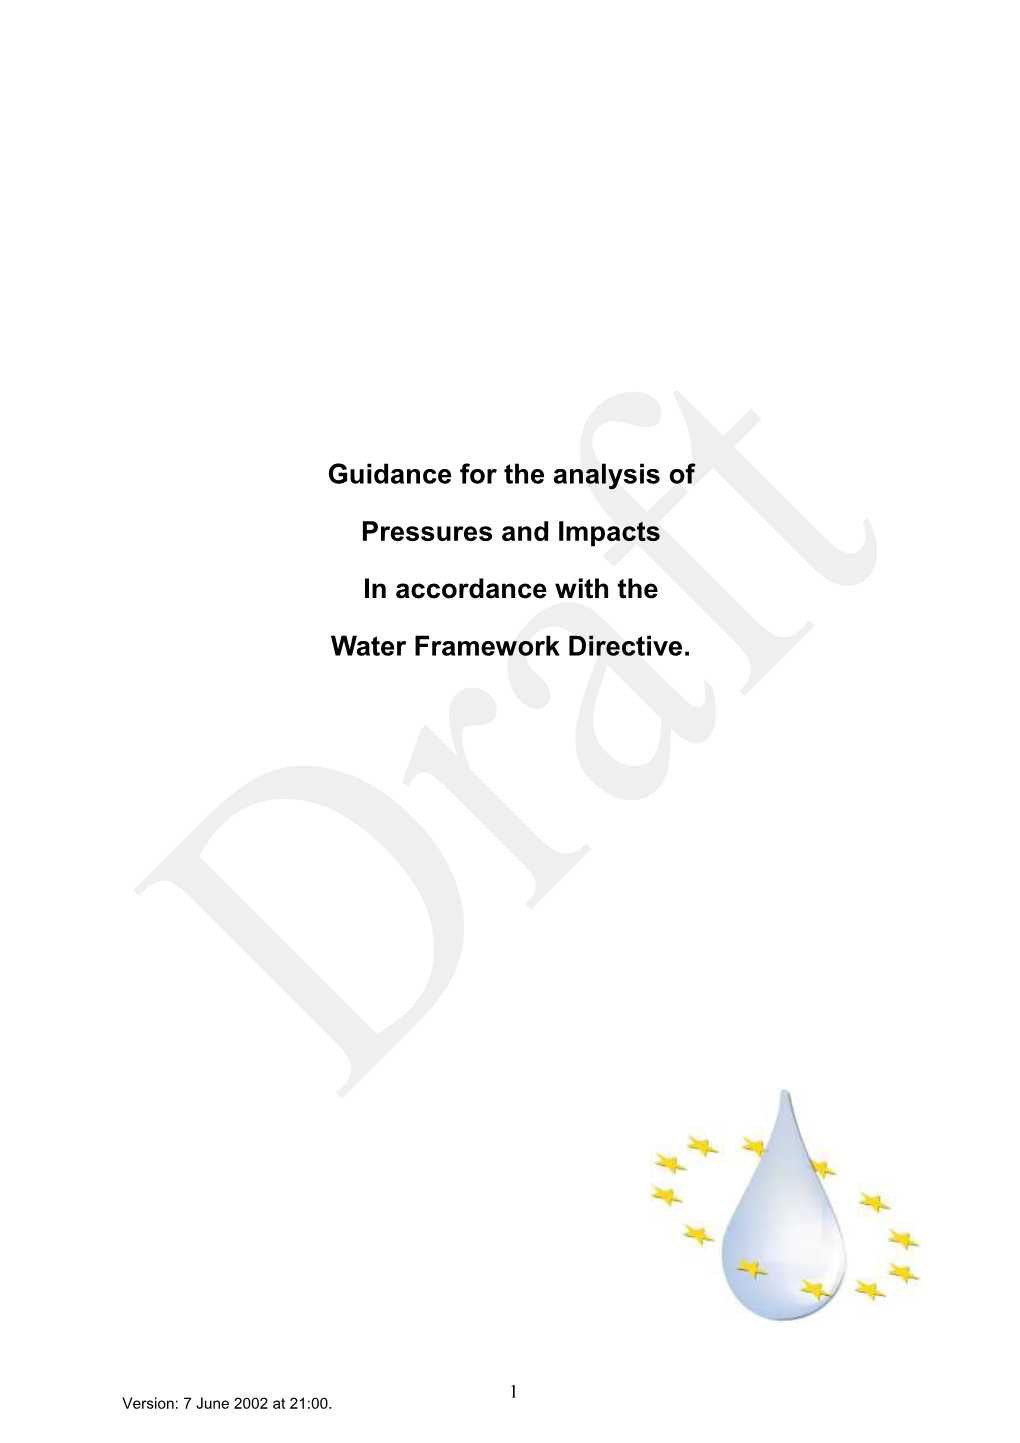 Guidance for the Analysis of Pressures and Impacts in Accordance with the Water Framework